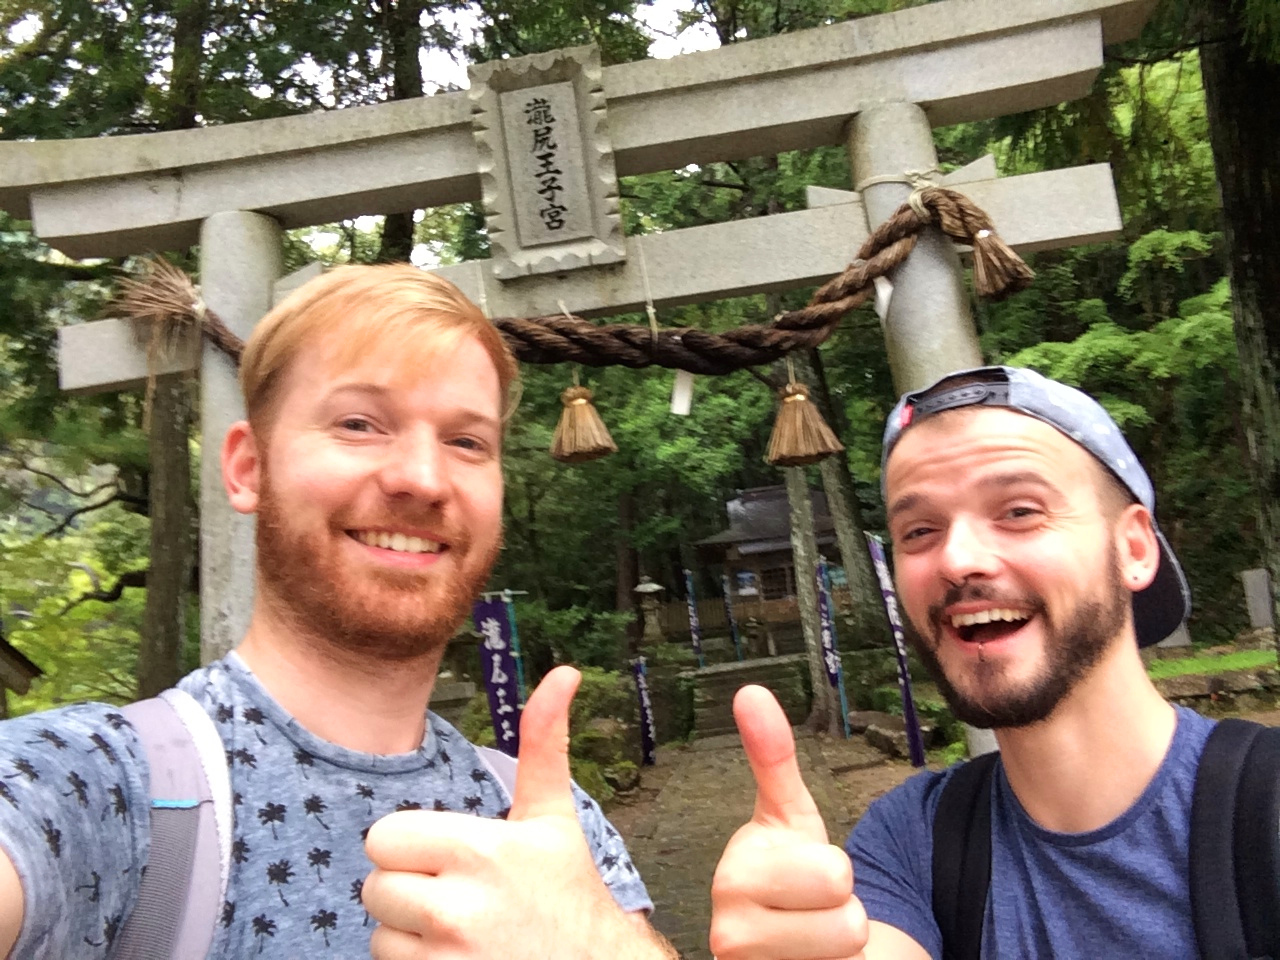 We are ready for our first gay couple pilgrimage in Japan © CoupleofMen.com